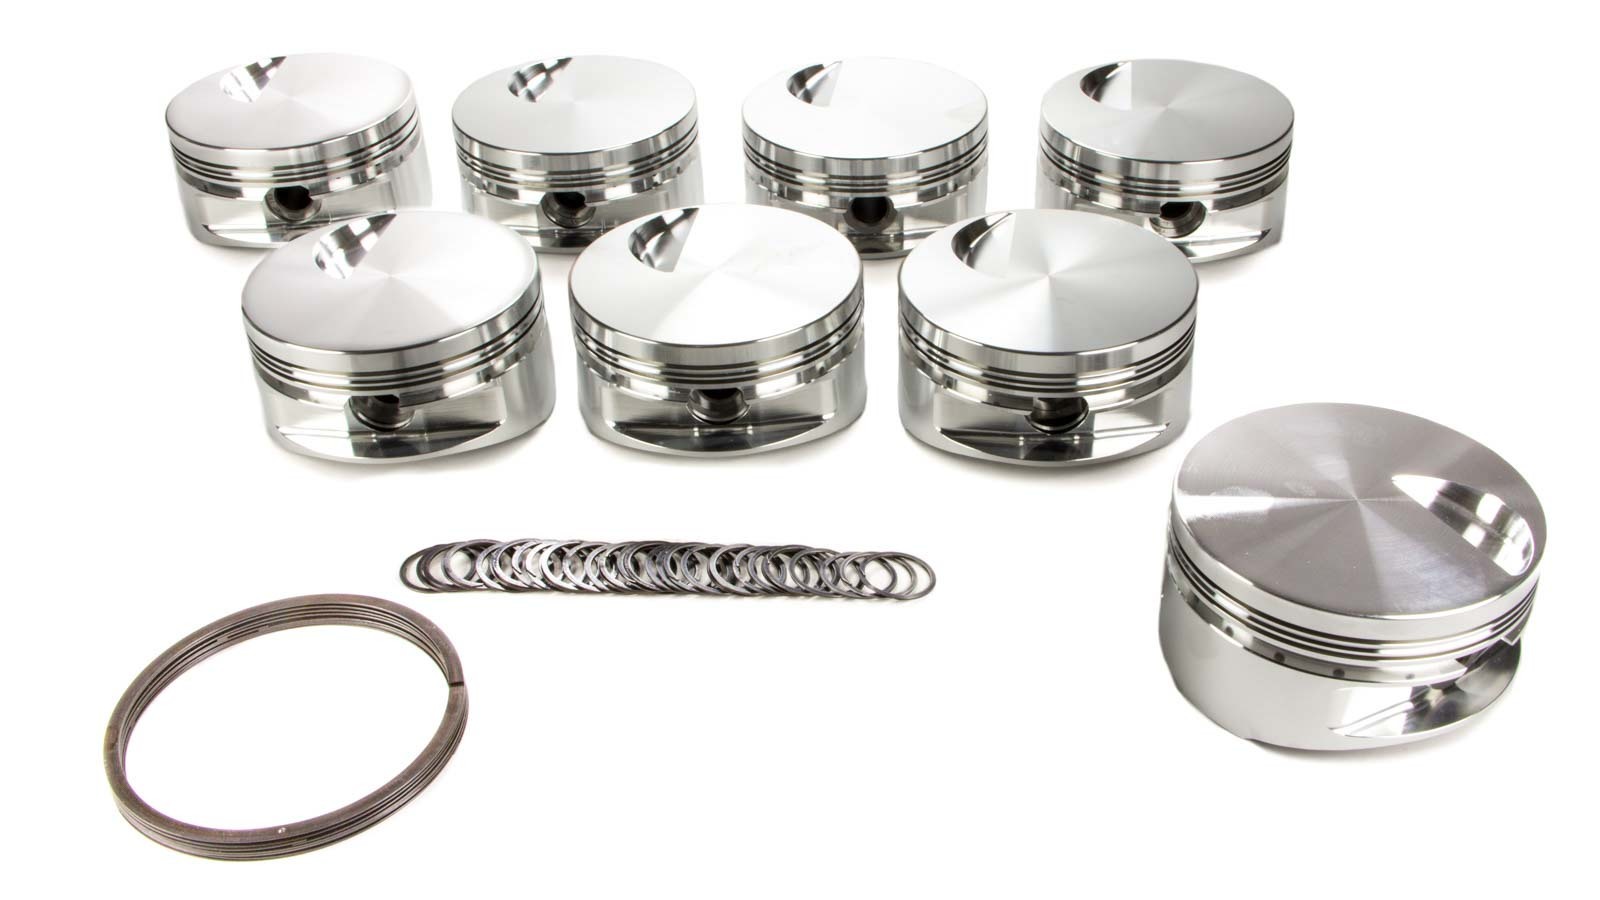 JE Pistons 257966 Piston, Big Block Flat Top, Forged, 4.530 in Bore, 1/16 x 1/16 x 3/16 in Ring Grooves, Minus 3.00 cc, Big Block Chevy, Set of 8